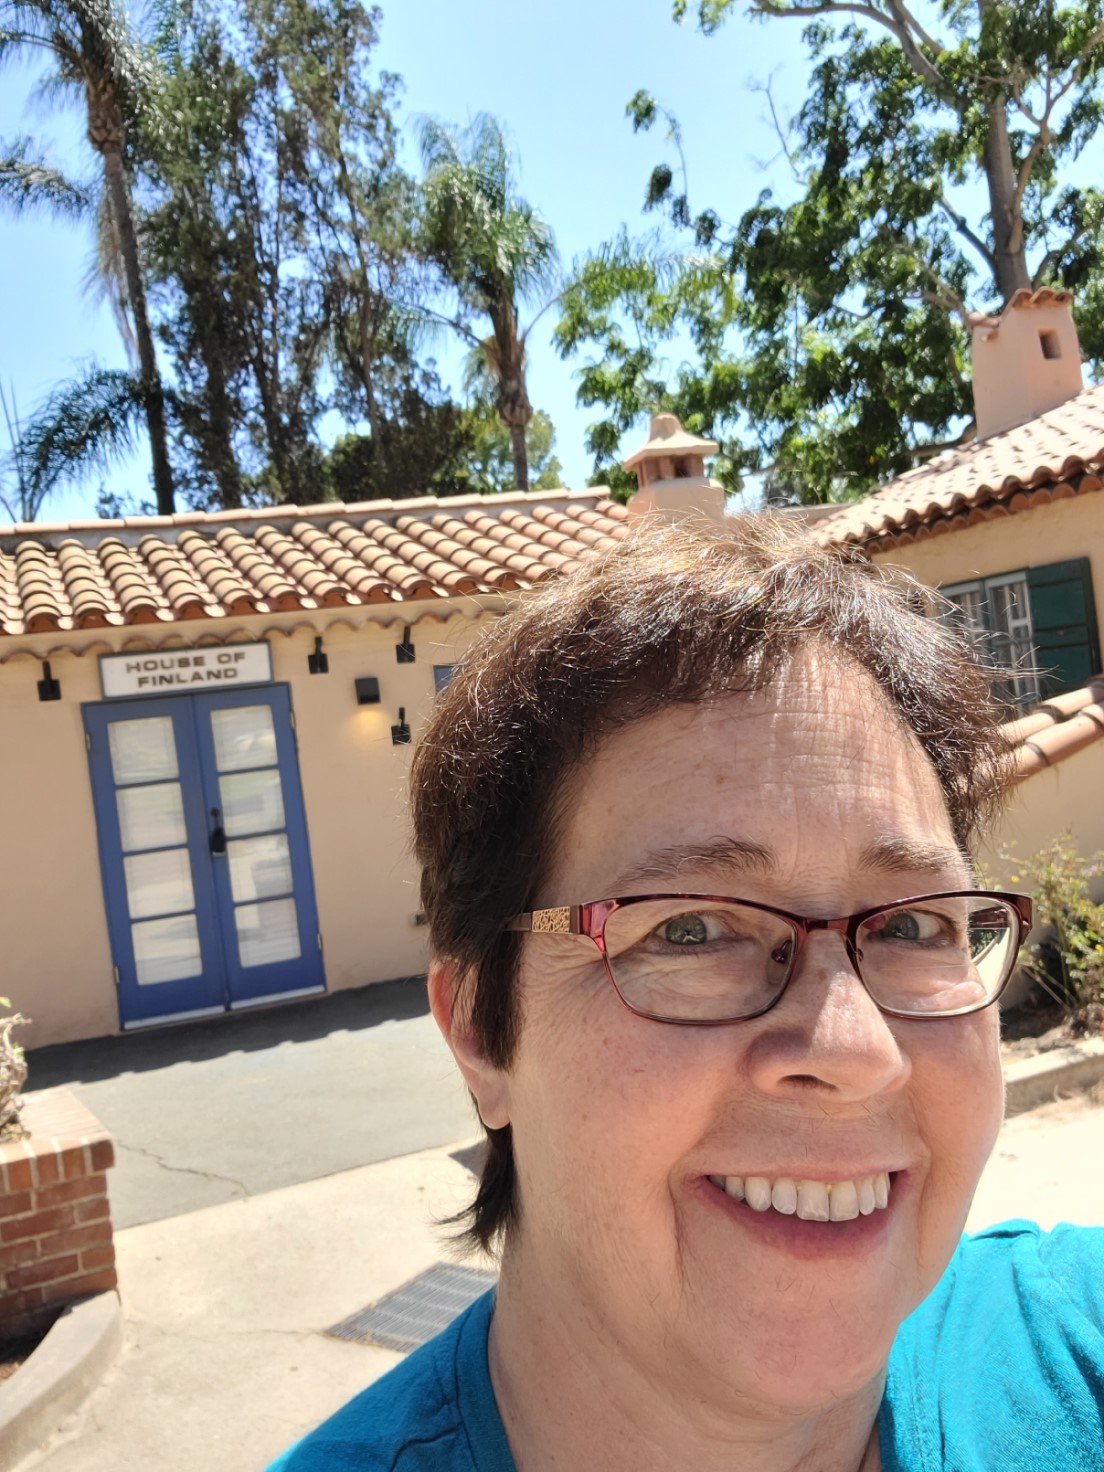 Honorary consul Dr. Kathrin S. Mautino in front of the House of Finland in San Diego.